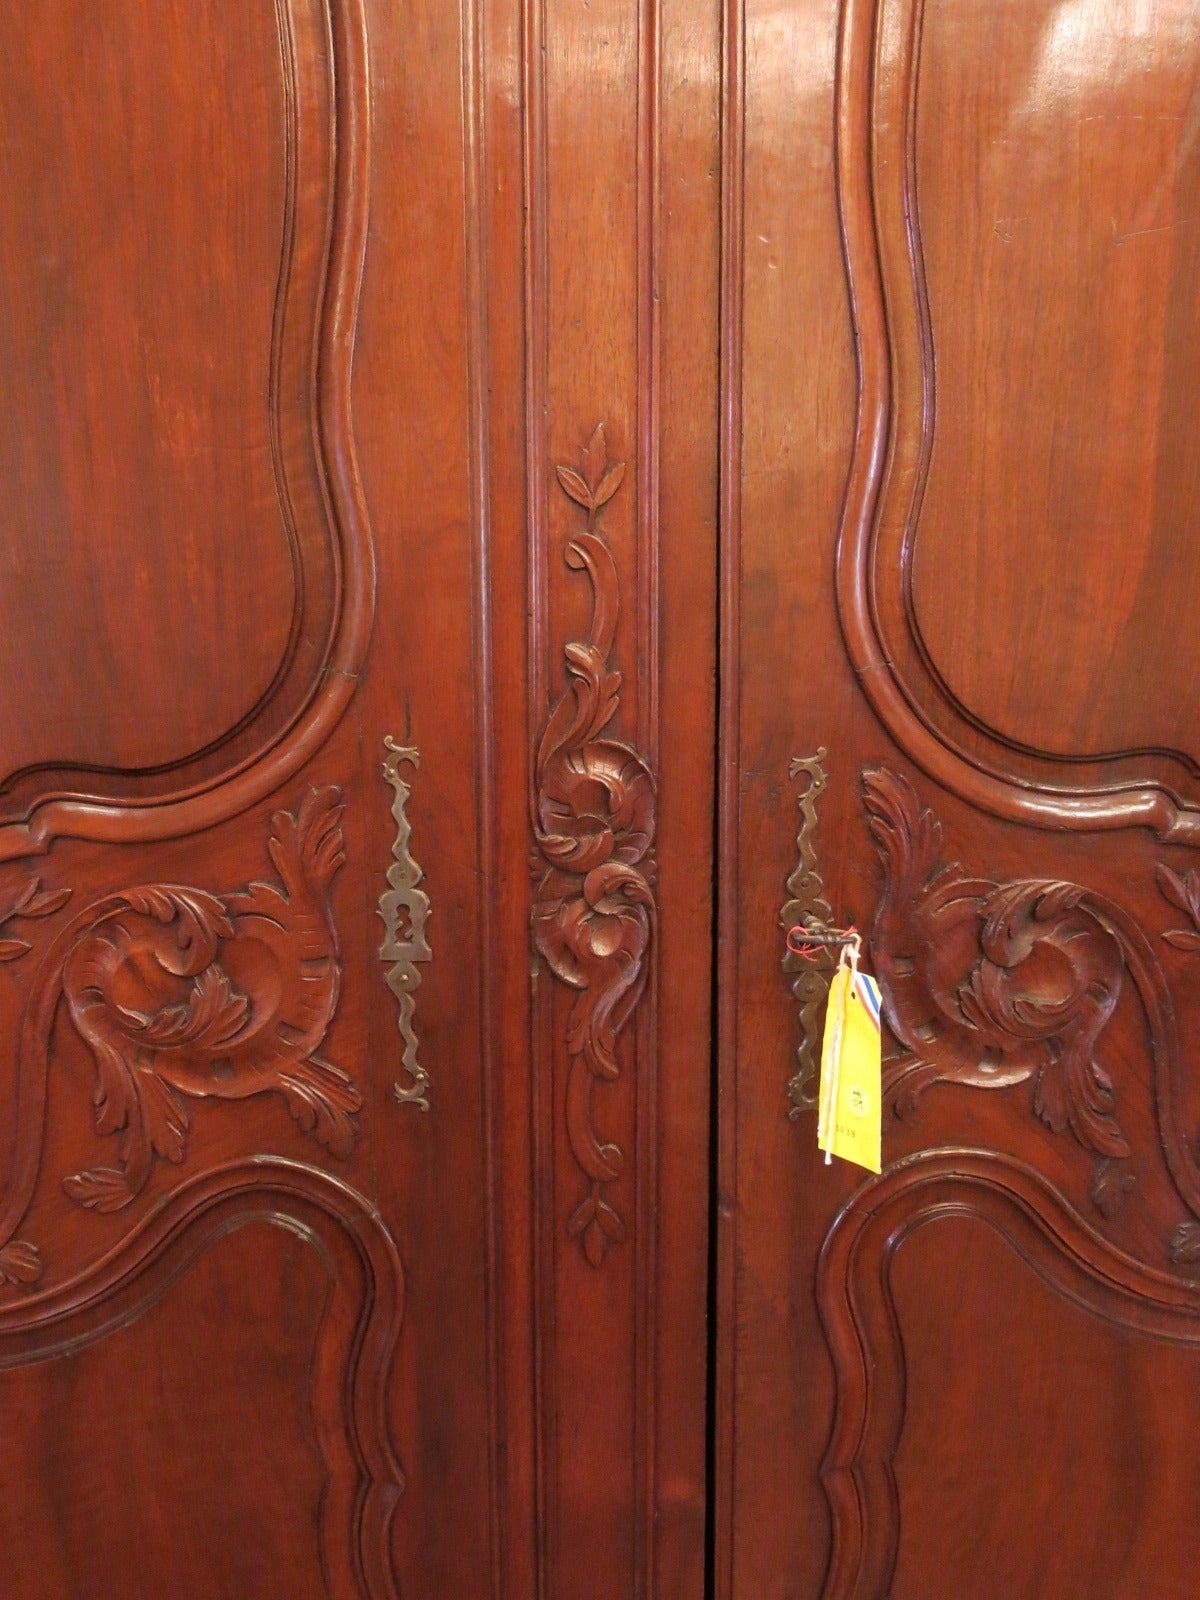 18th Century Period Regence Walnut Armoire In Good Condition For Sale In New Orleans, LA